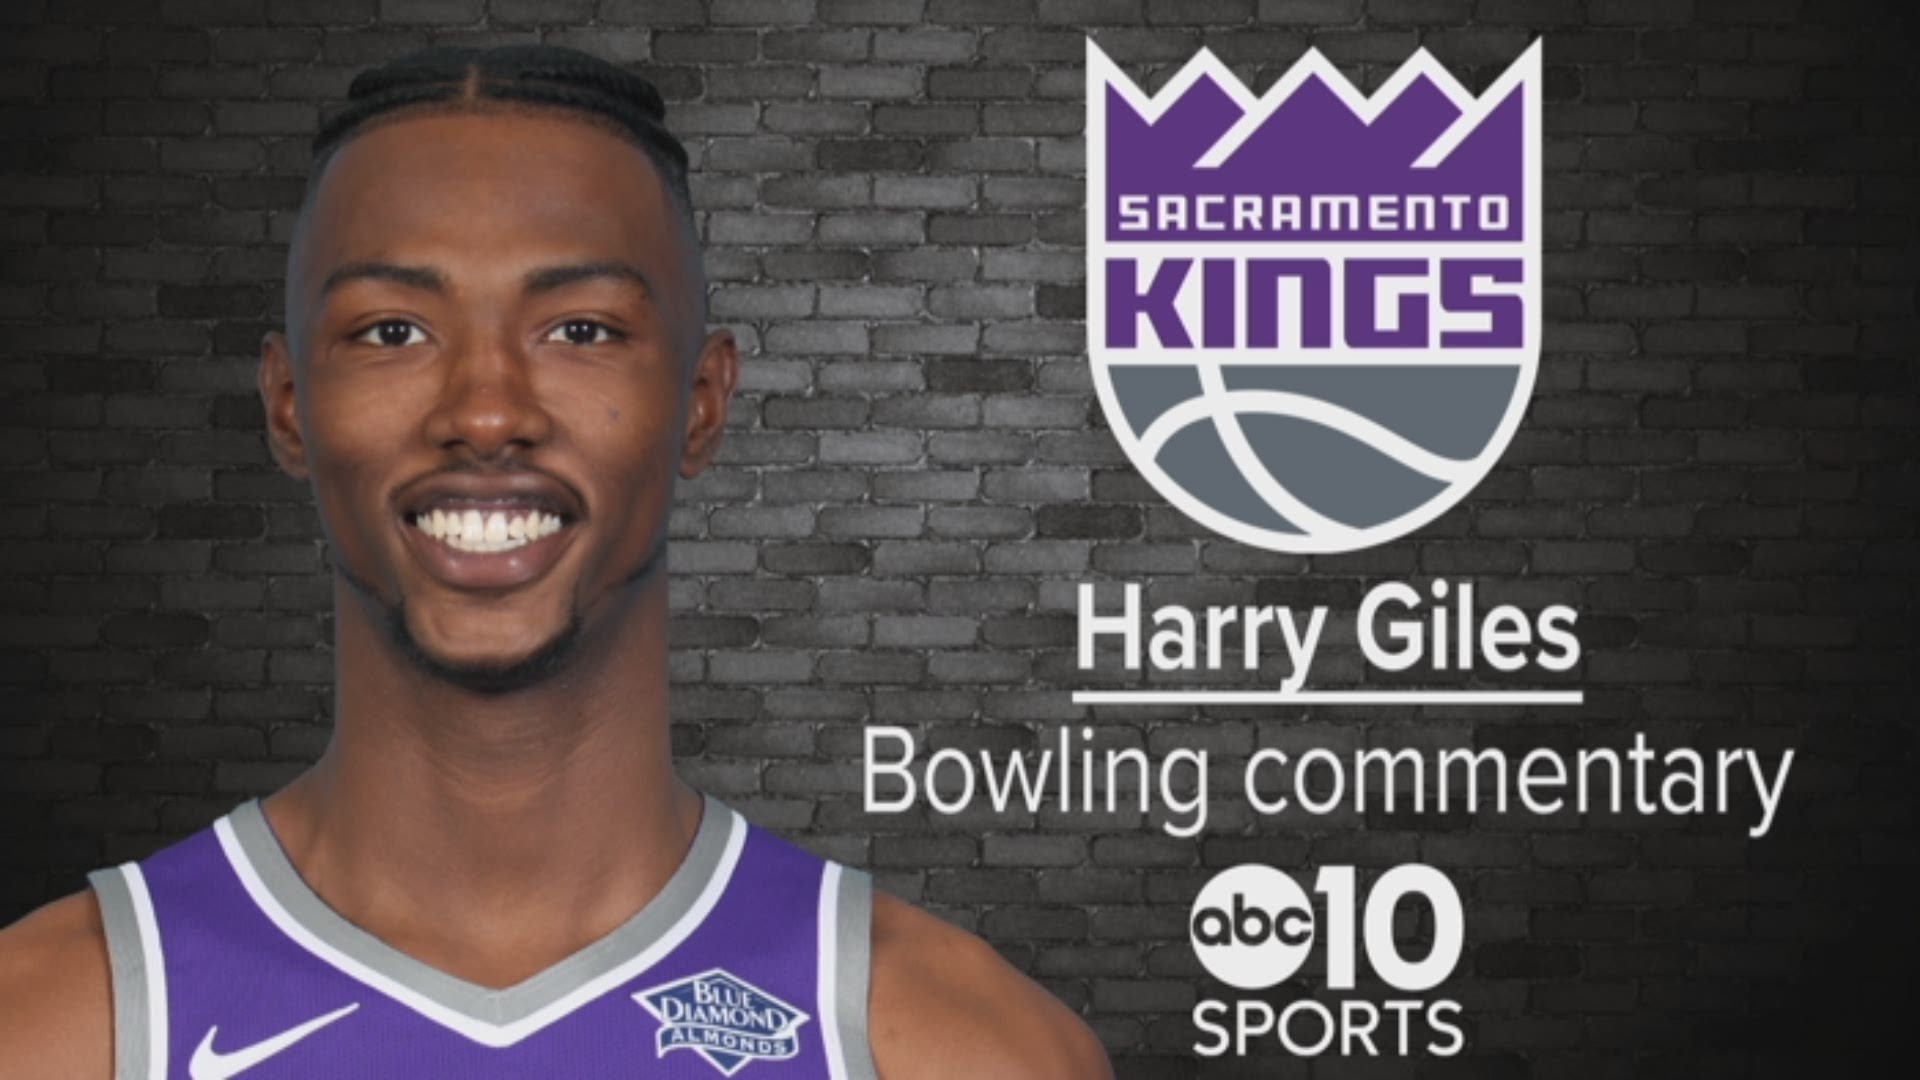 While participating in De'Aaron Fox's charity bowling event in Rocklin, Sacramento Kings rookie Harry Giles assumed the role of ABC10 reporter, offering his unique commentary on the event, as well as his teammates bowling talents.